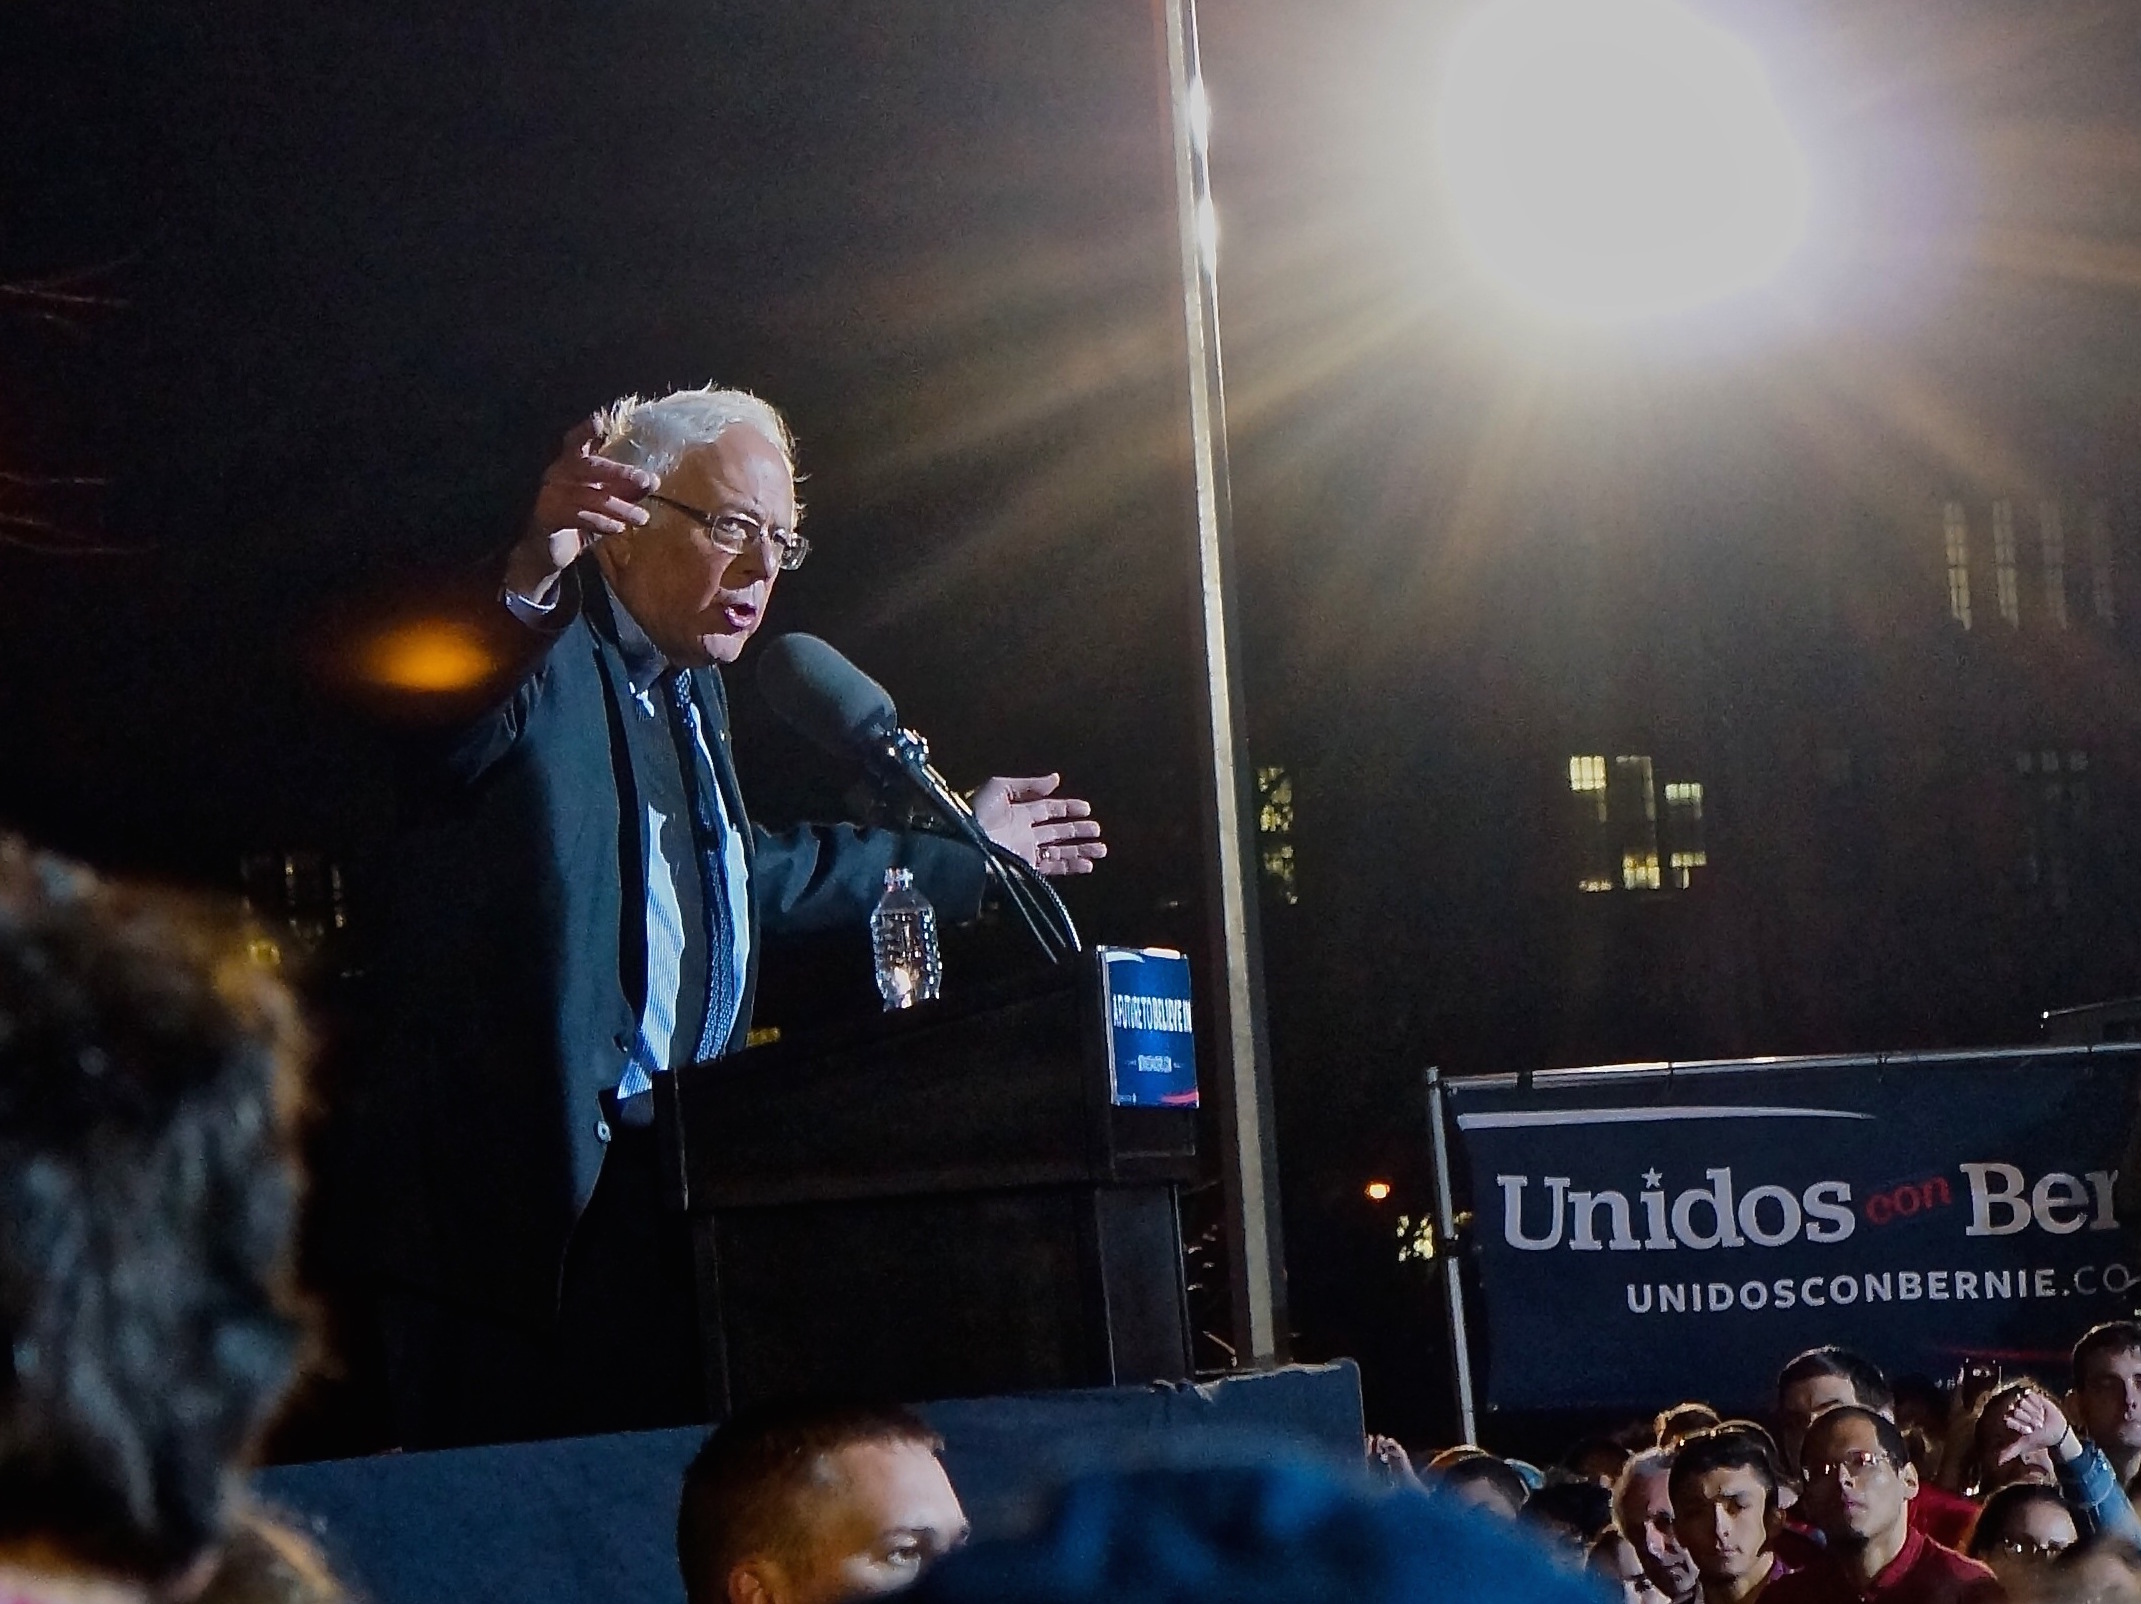 Bernie Sanders speaking in Mott Haven, the Bronx, on Thursday, kicking off his campaigning for the critical April 19 New York presidential primary.  Photo by Sarah Ferguson